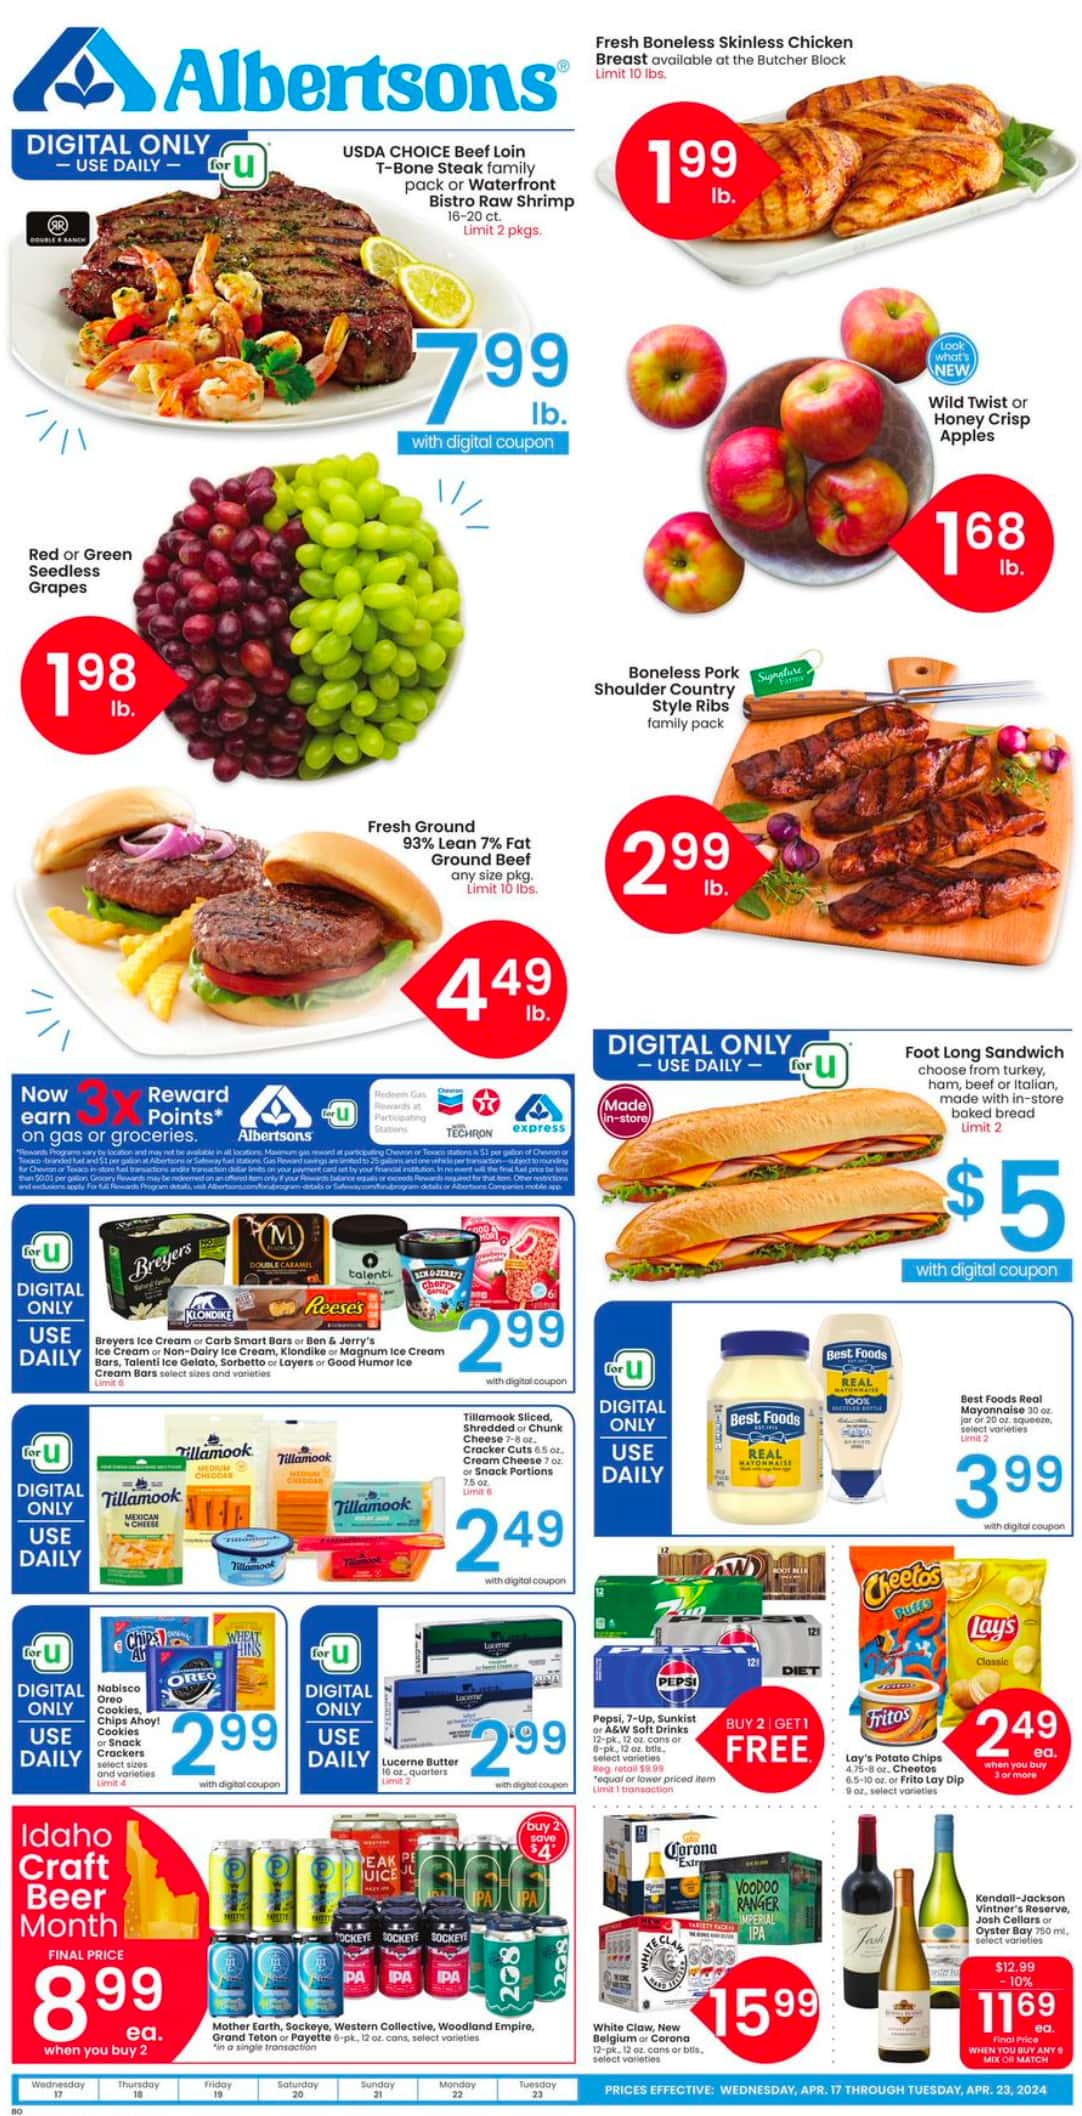 Albertsons_weekly_ad_041724_01